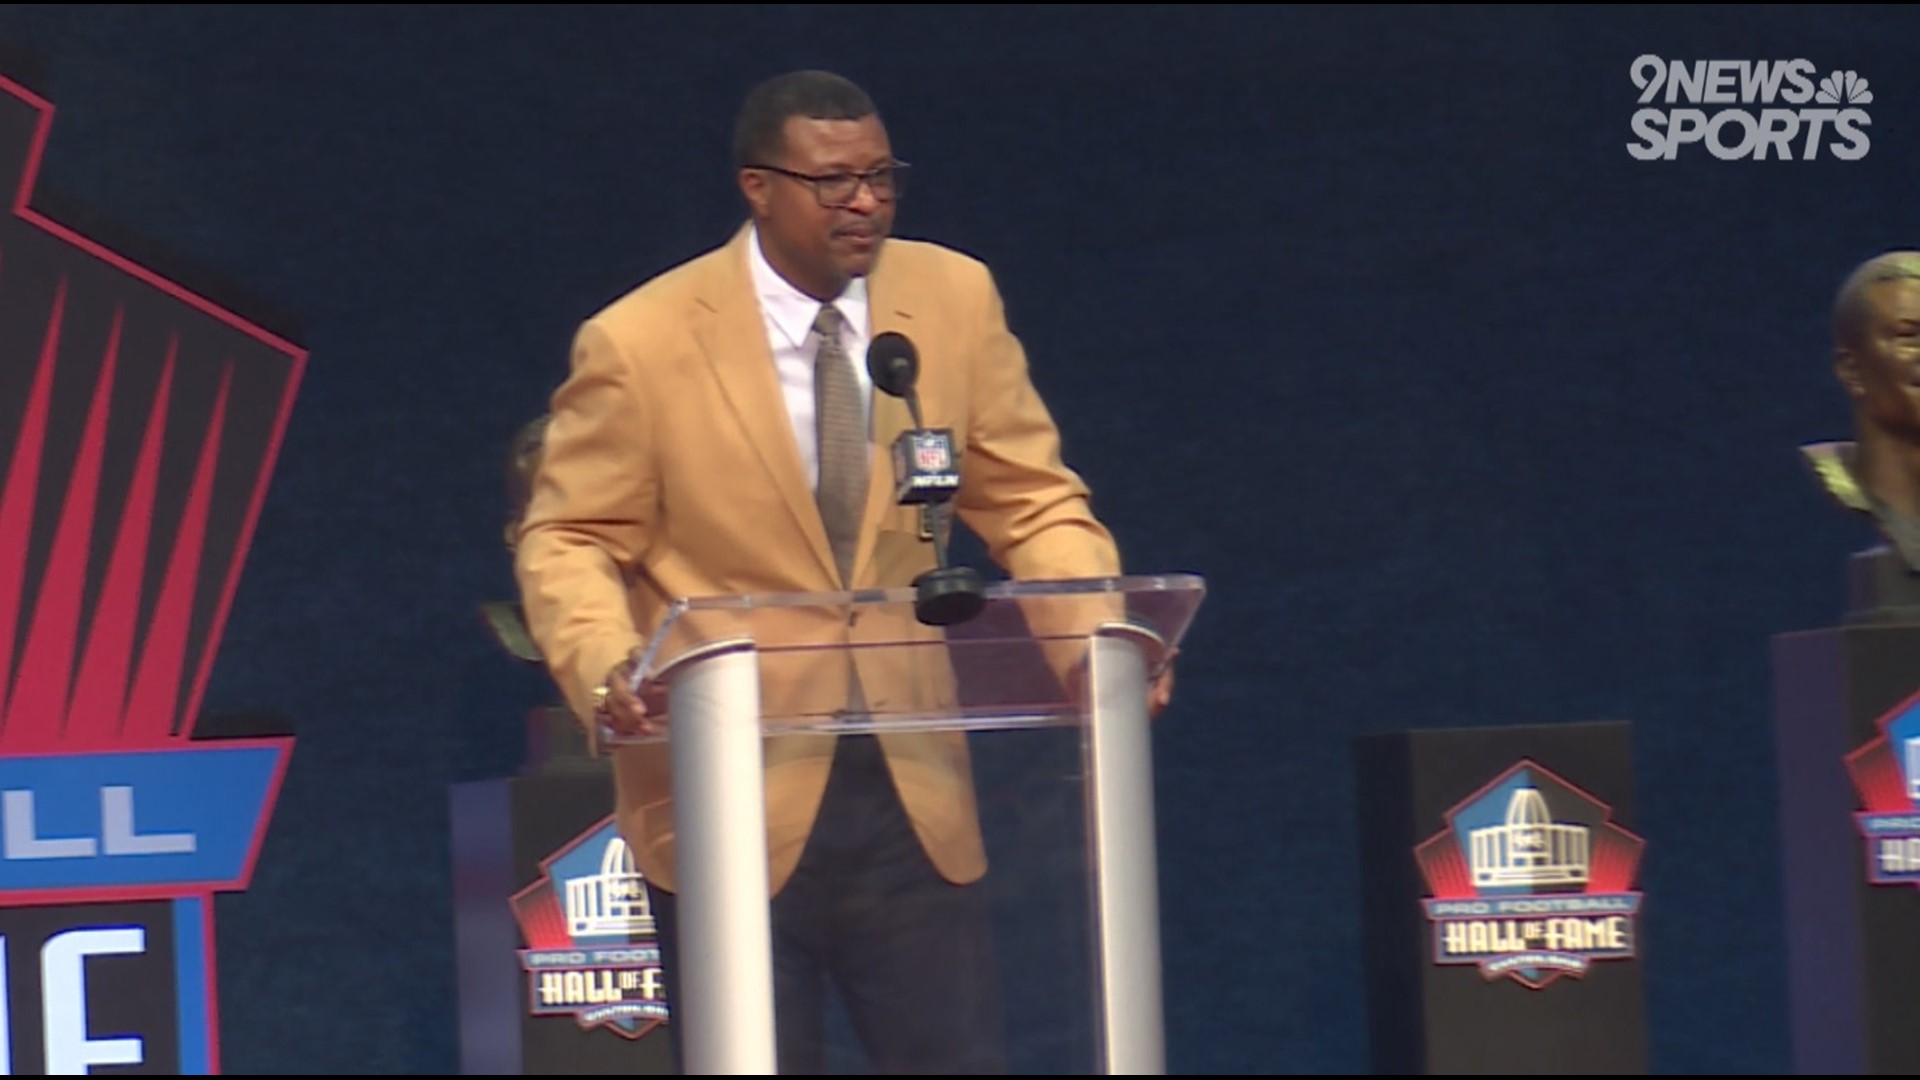 Former Broncos safety Steve Atwater was enshrined at the Pro Football Hall of Fame in Canton, Ohio, this weekend.